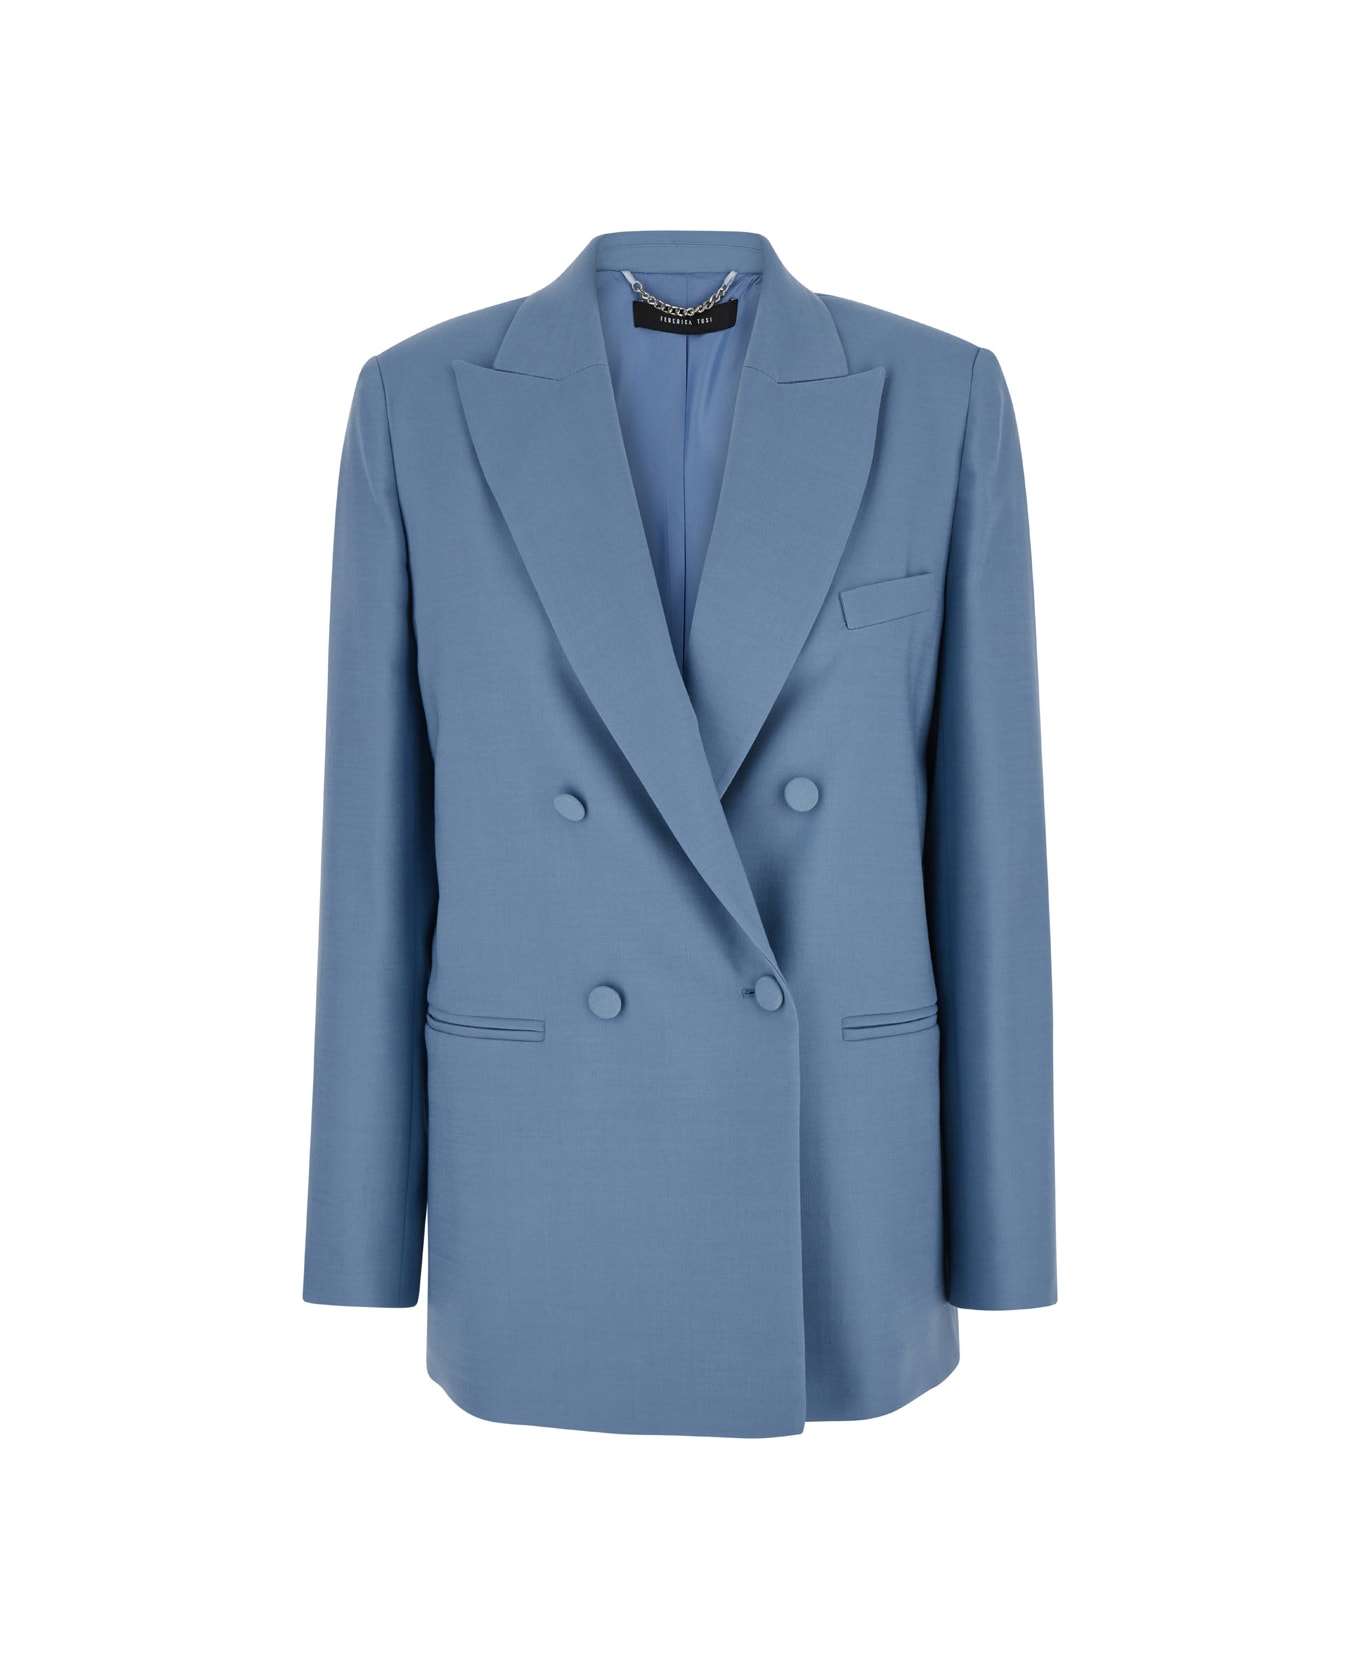 Federica Tosi Light Blue Double-breasted Blazer In Wool Blend Stretch Woman - Blu